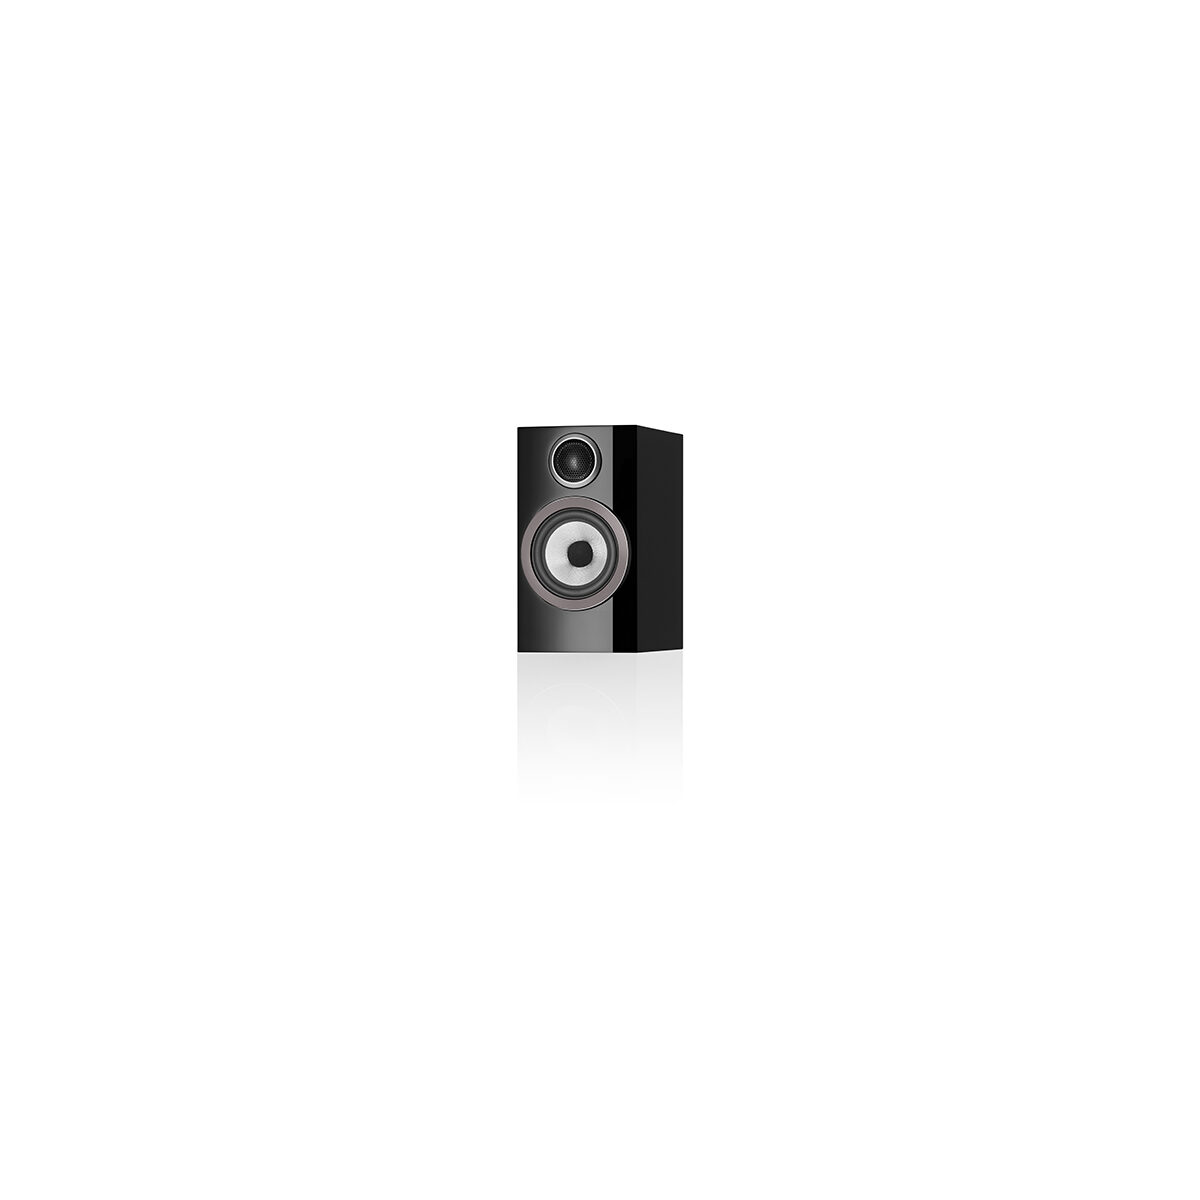 Bowers&Wilkins-707S3-Black-Front